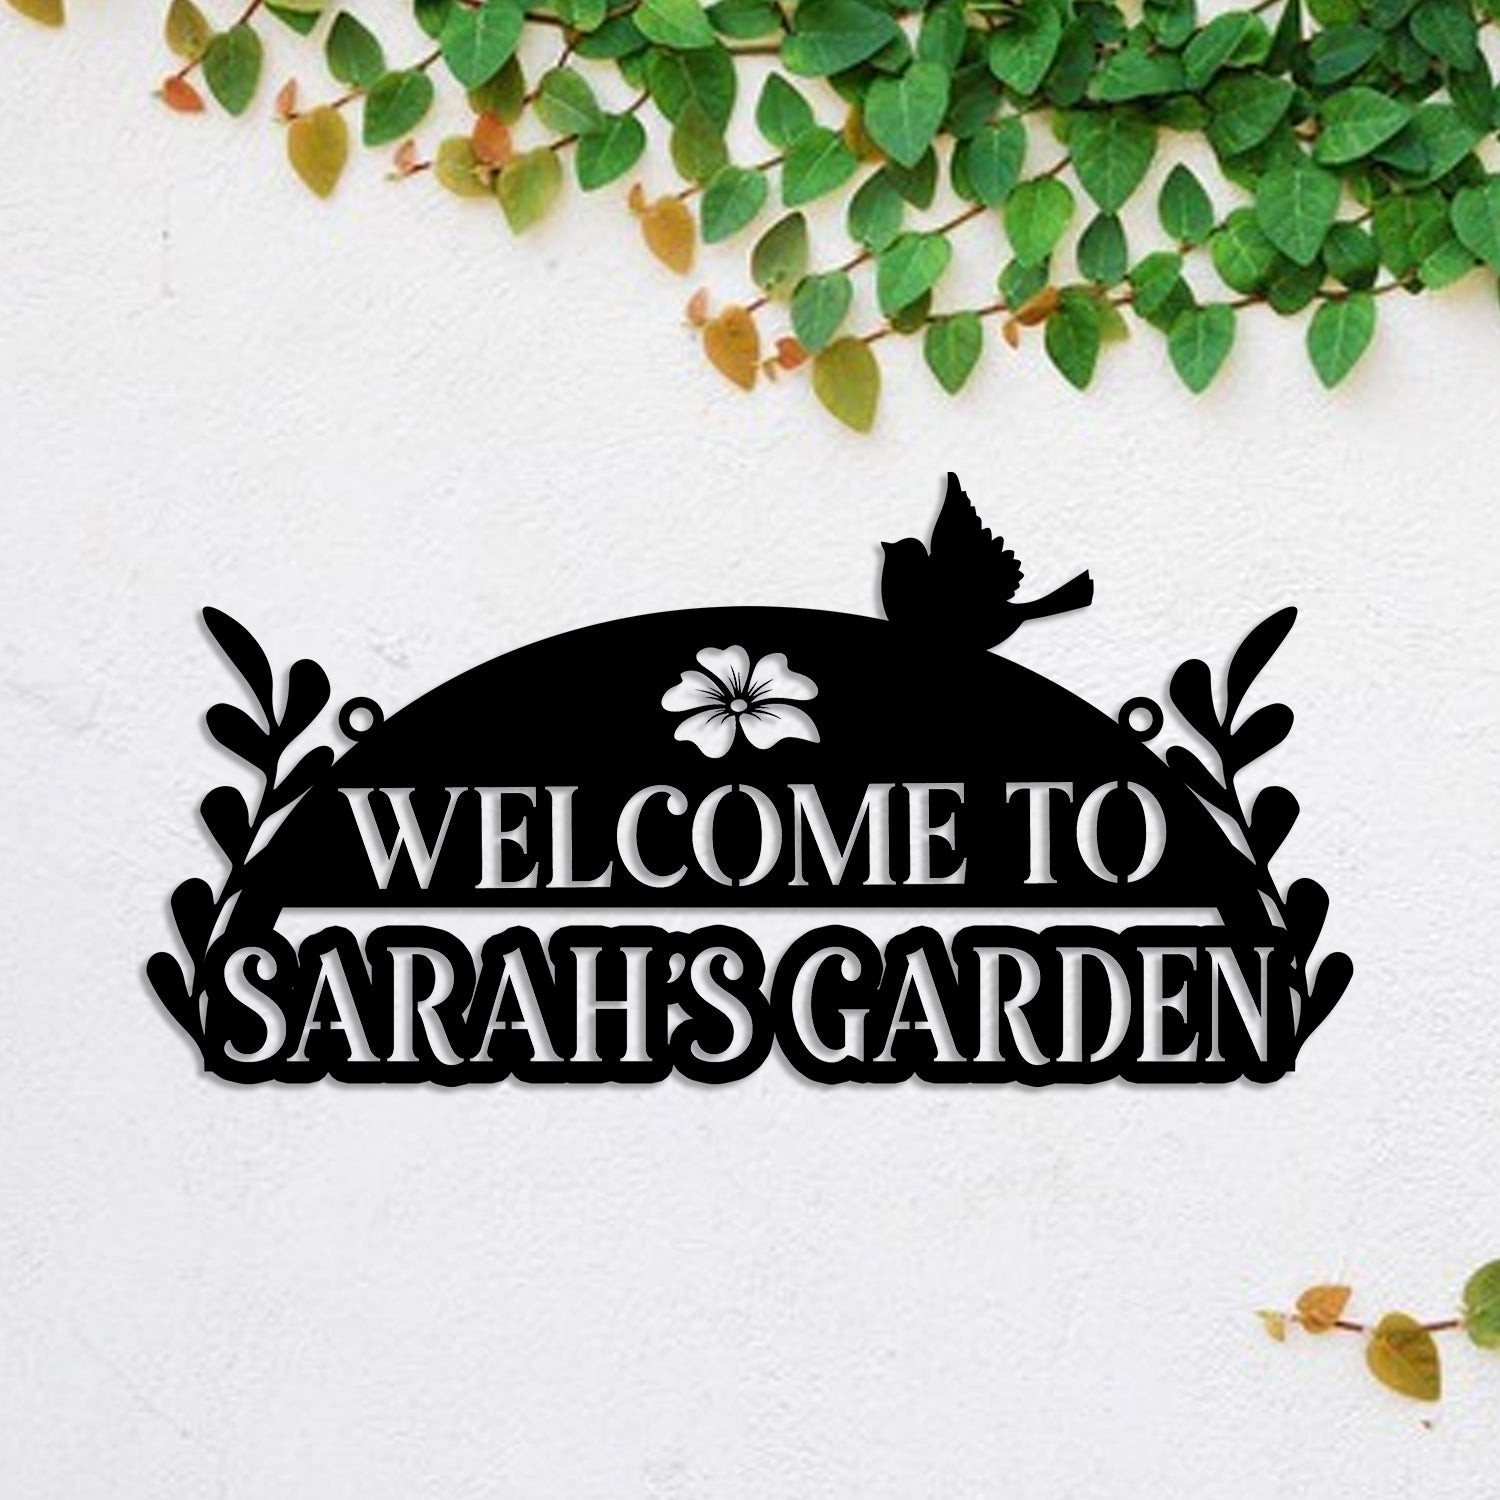 Personalized Metal Garden Sign, Stake, Home Decor, Wedding Art Gift For Her, Gardening Lovers, Metal Laser Cut Metal Signs Custom Gift Ideas 14x14IN